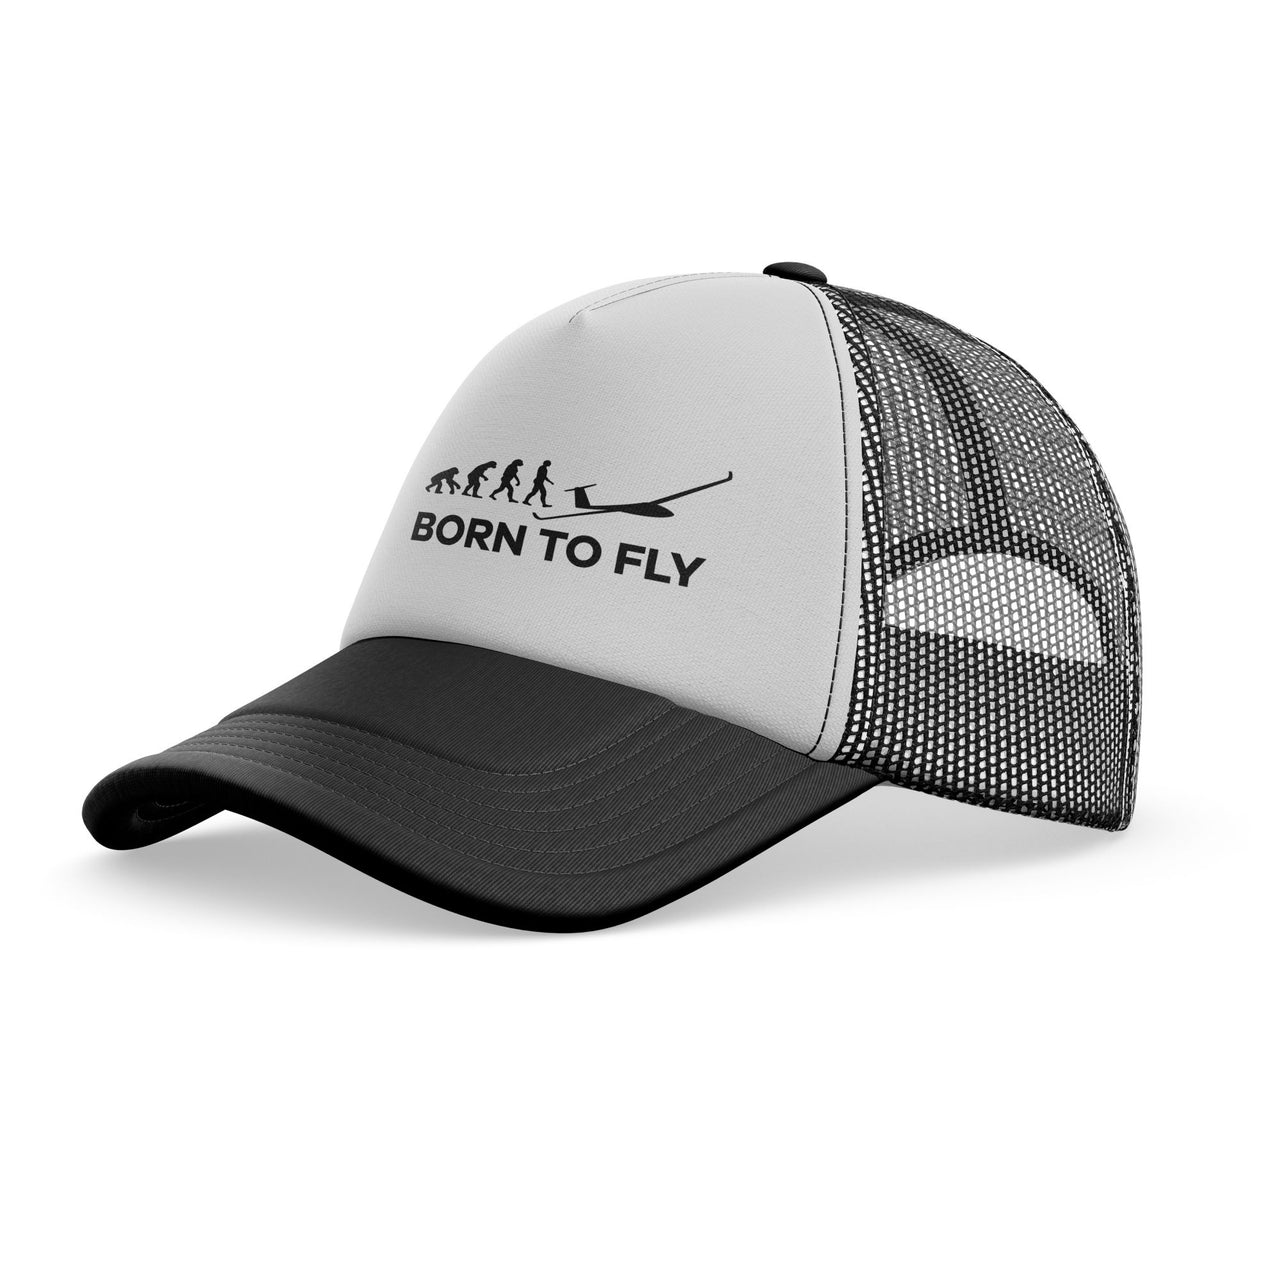 Born To Fly Glider Designed Trucker Caps & Hats